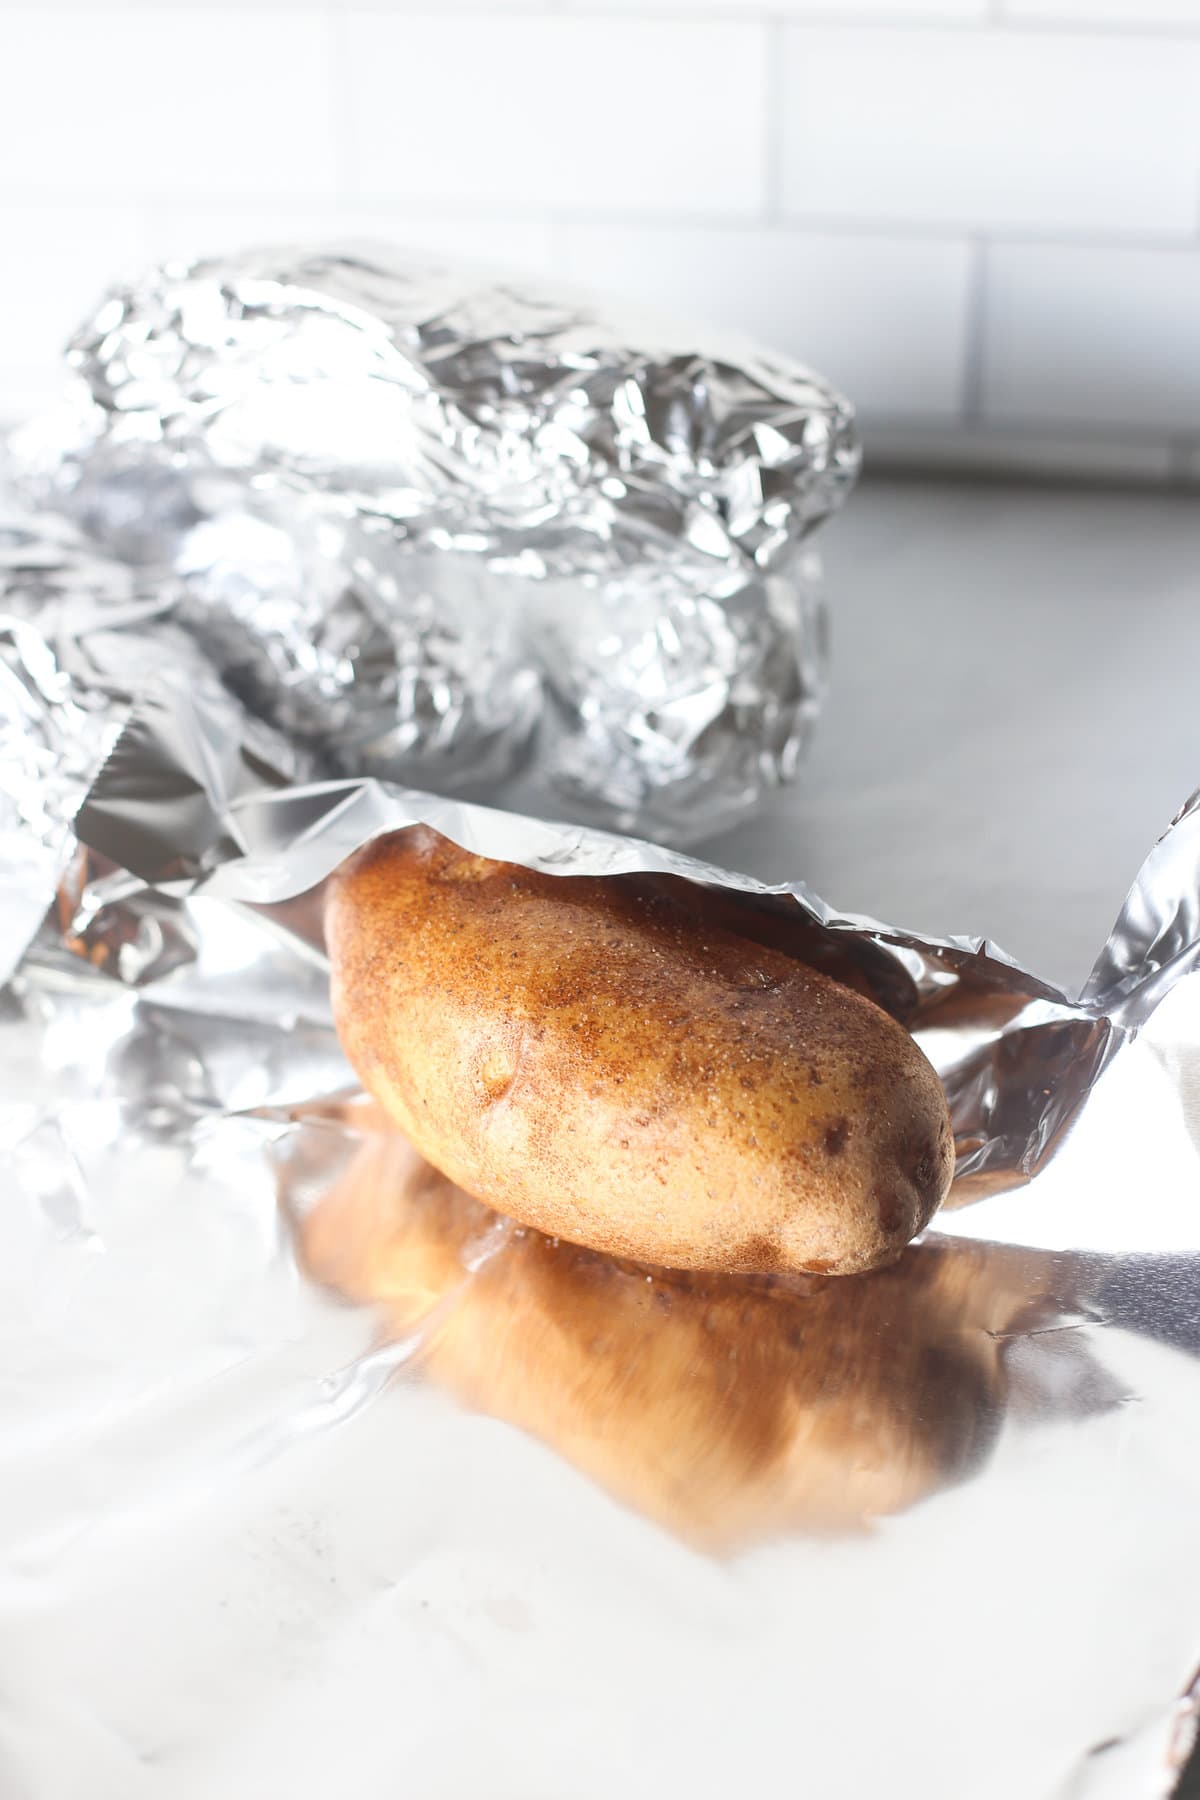 A russet potato being wrapped in foil.